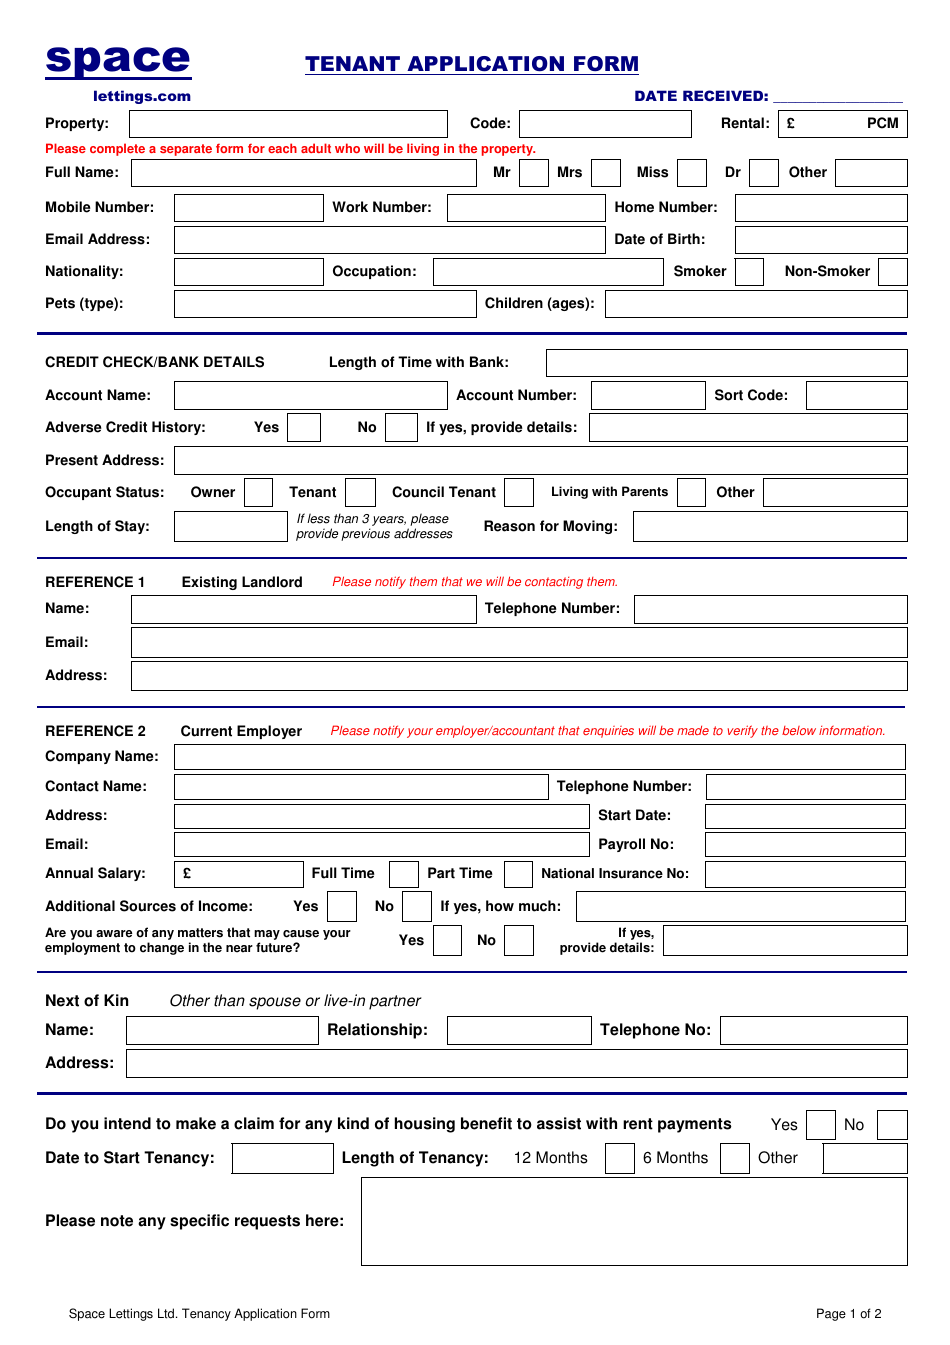 Tenant Application Form - Space Lettings Ltd, Page 1